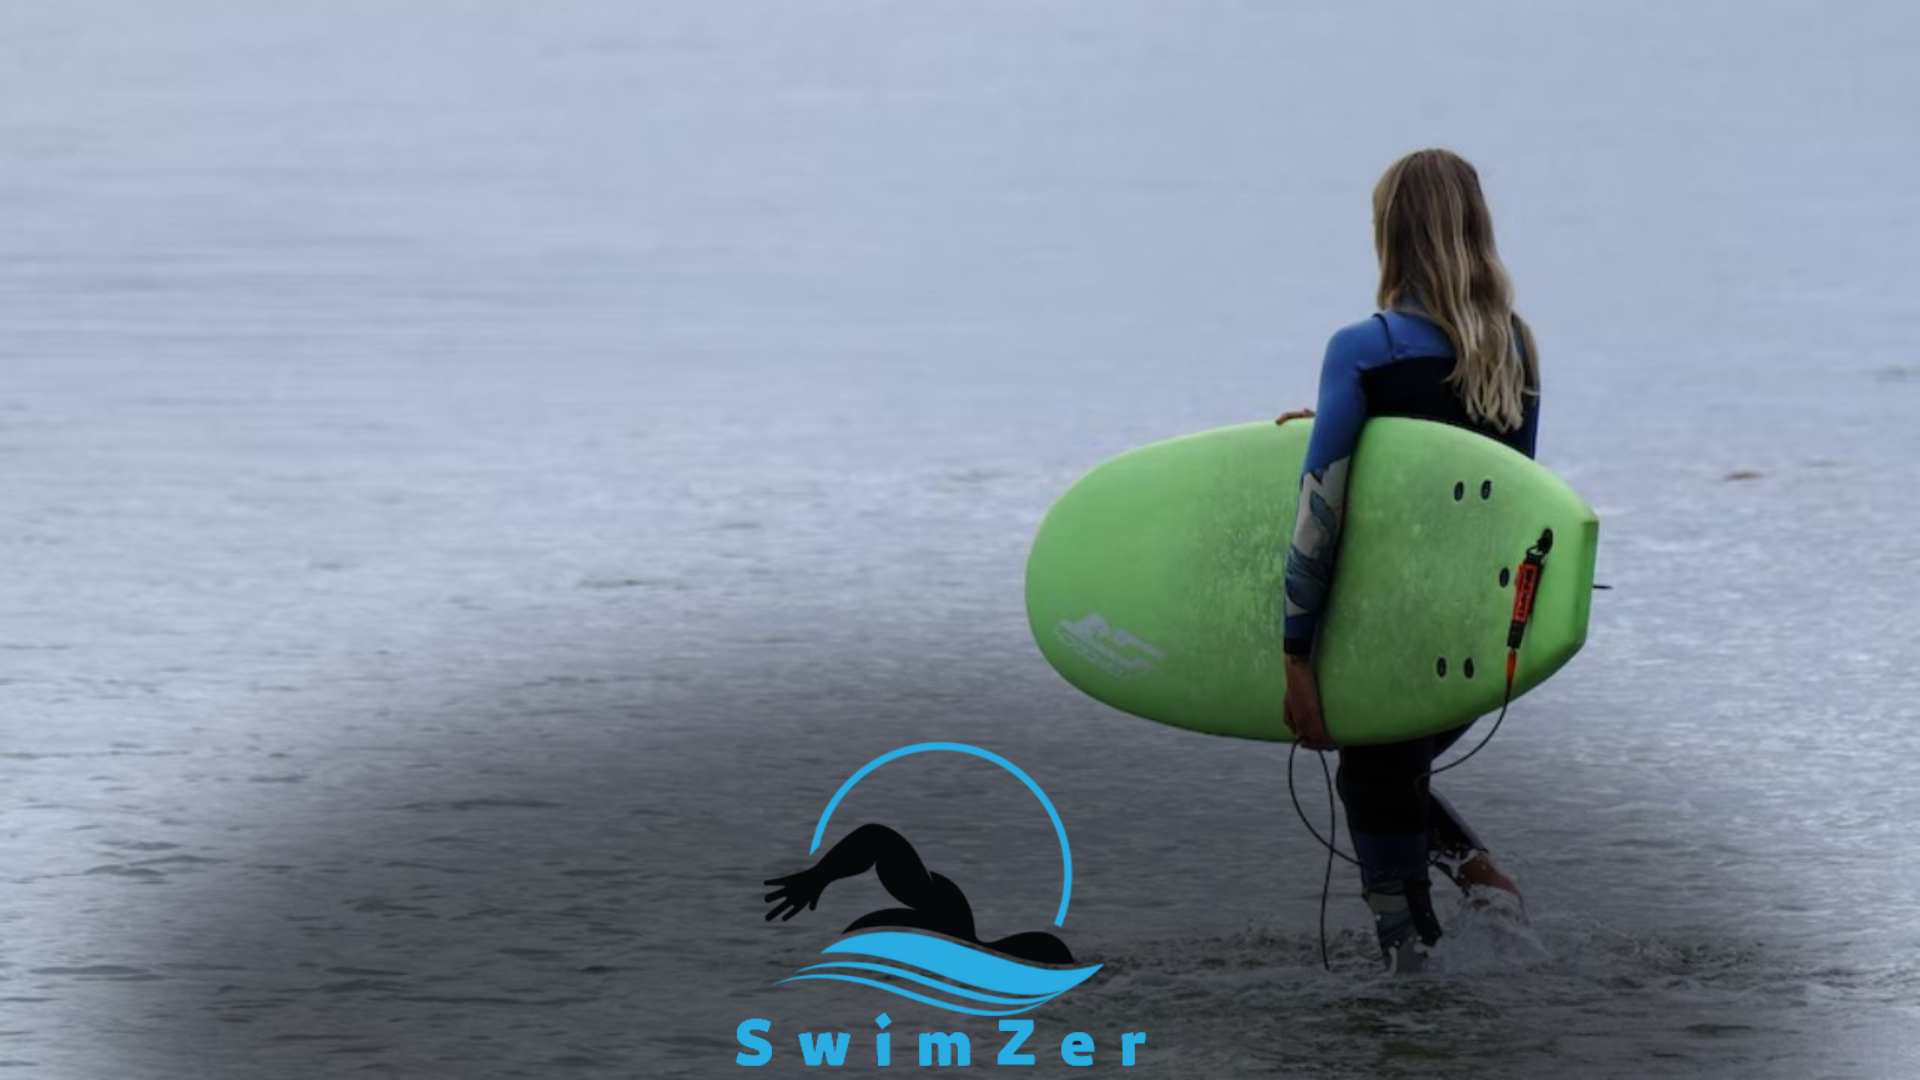 Can You Use a Surfing Wetsuit for Open Water Swimming